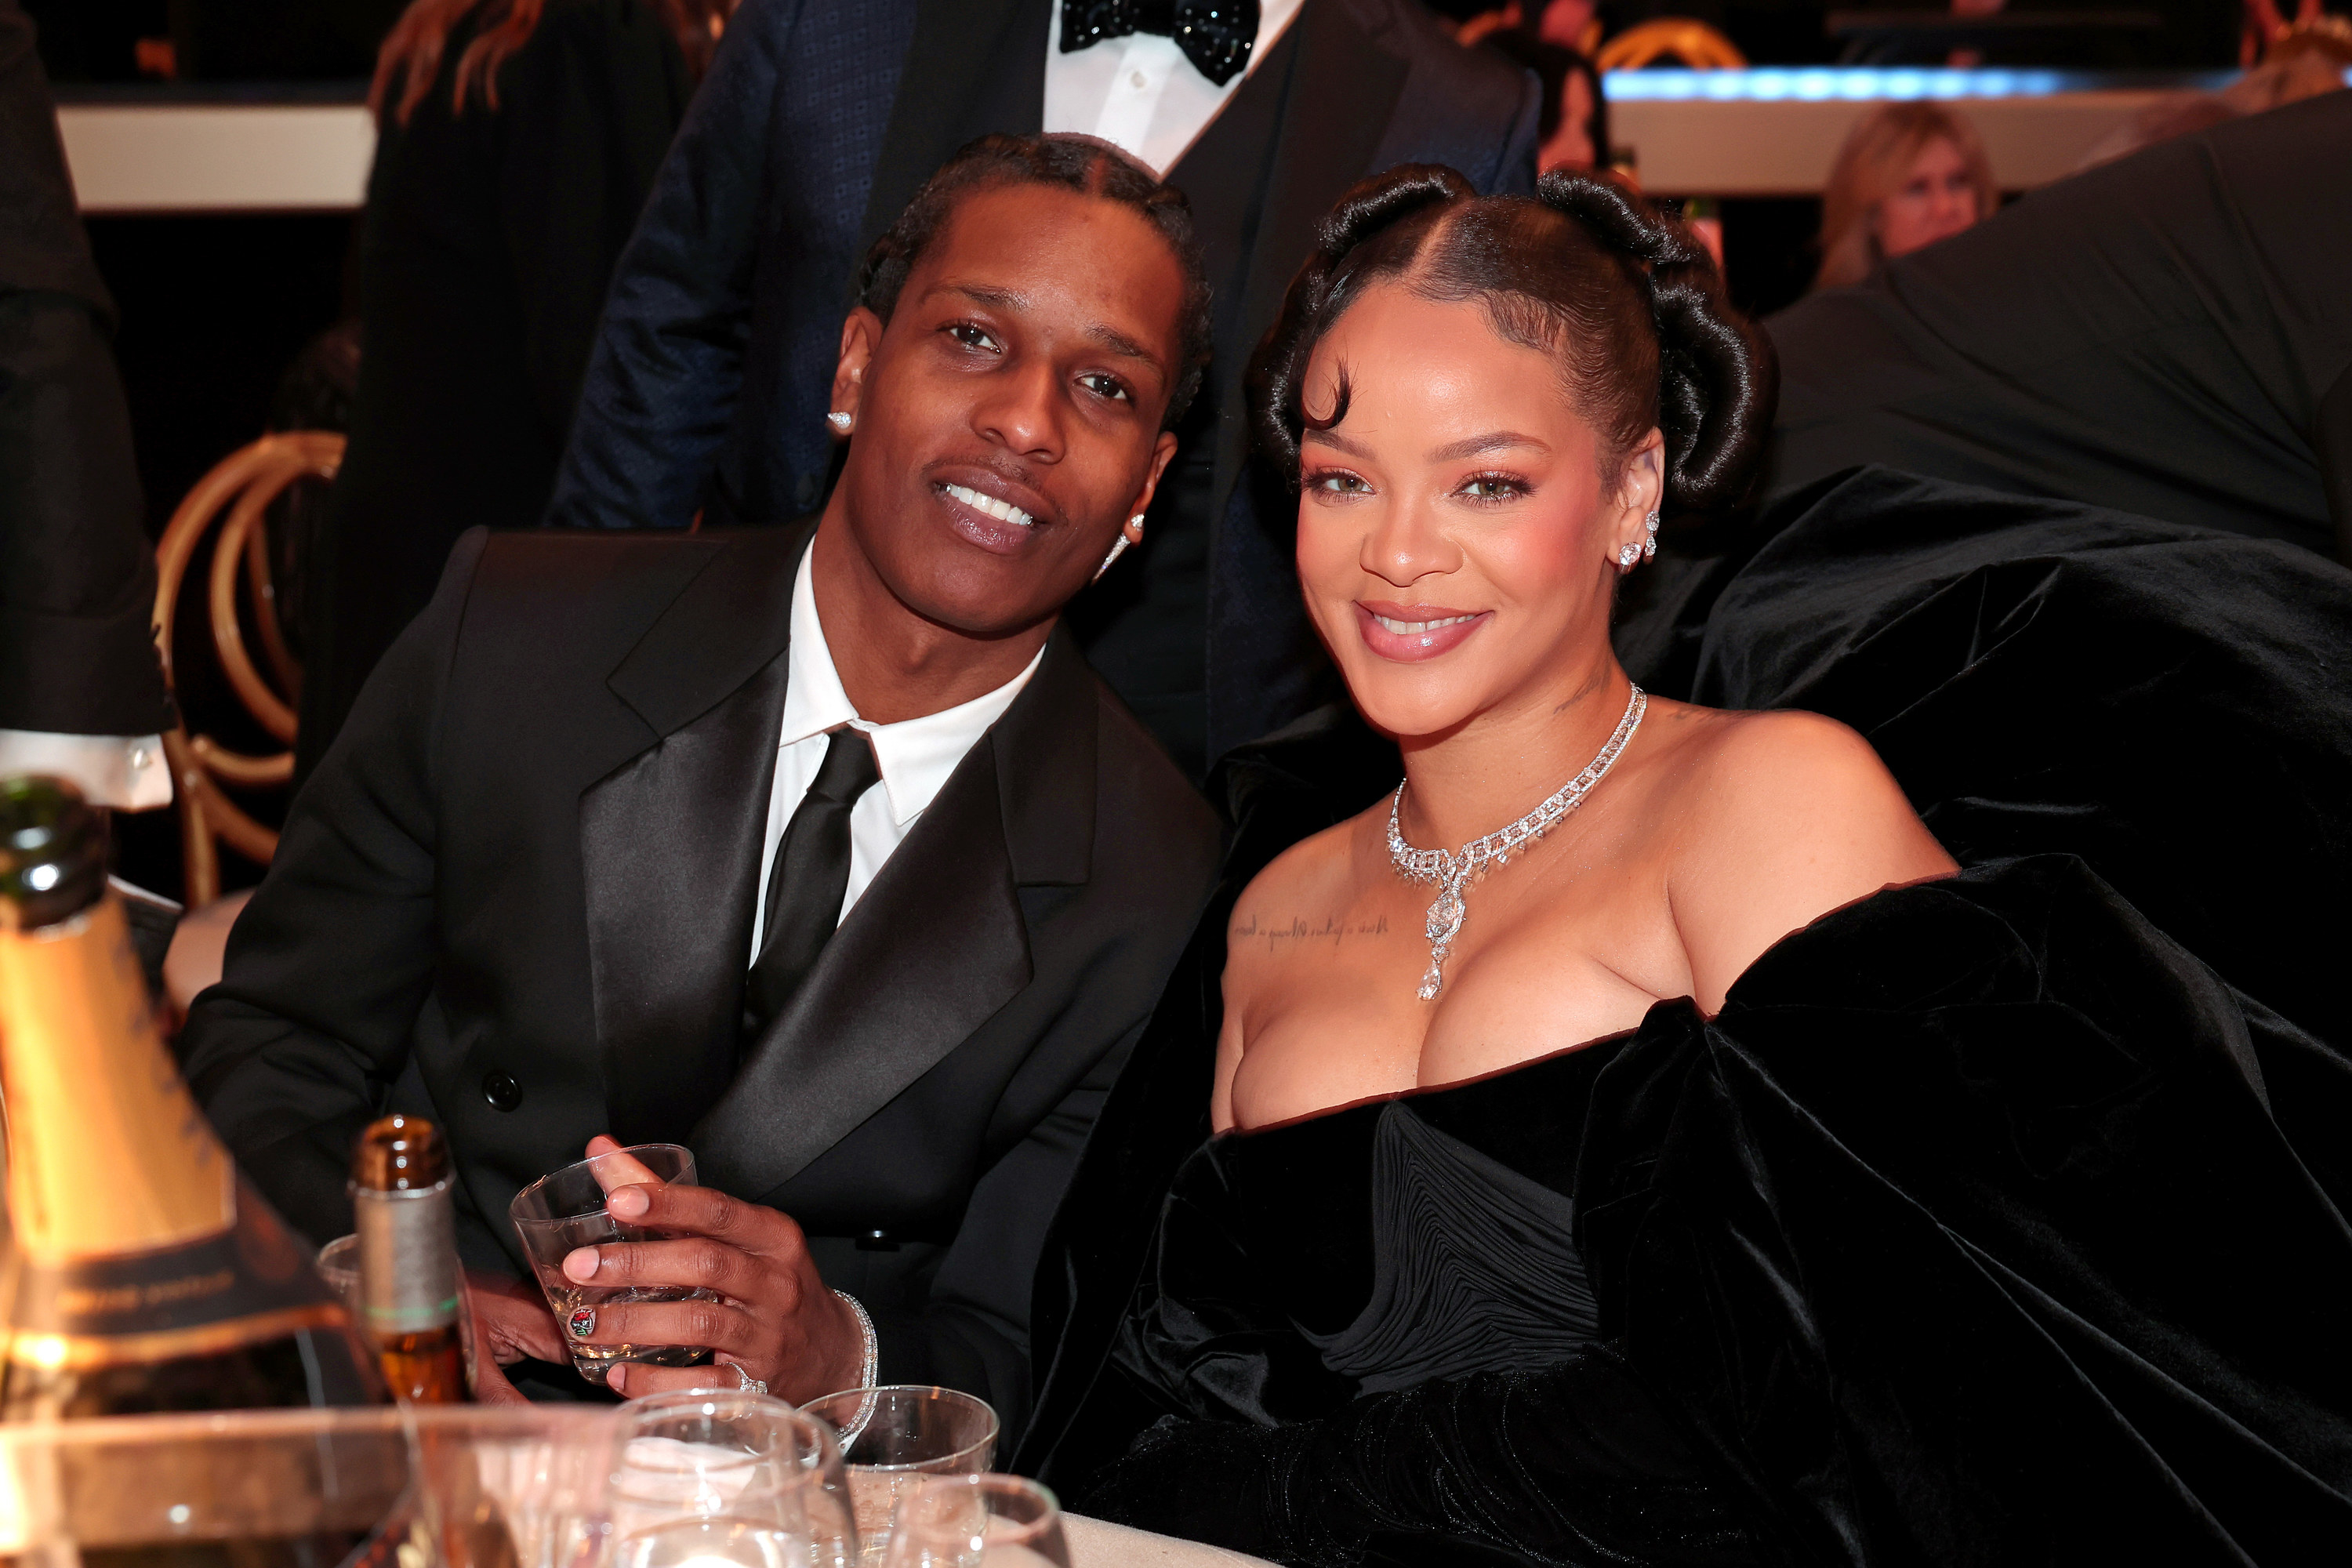 A close-up of Rihanna and A$AP sitting together and smiling